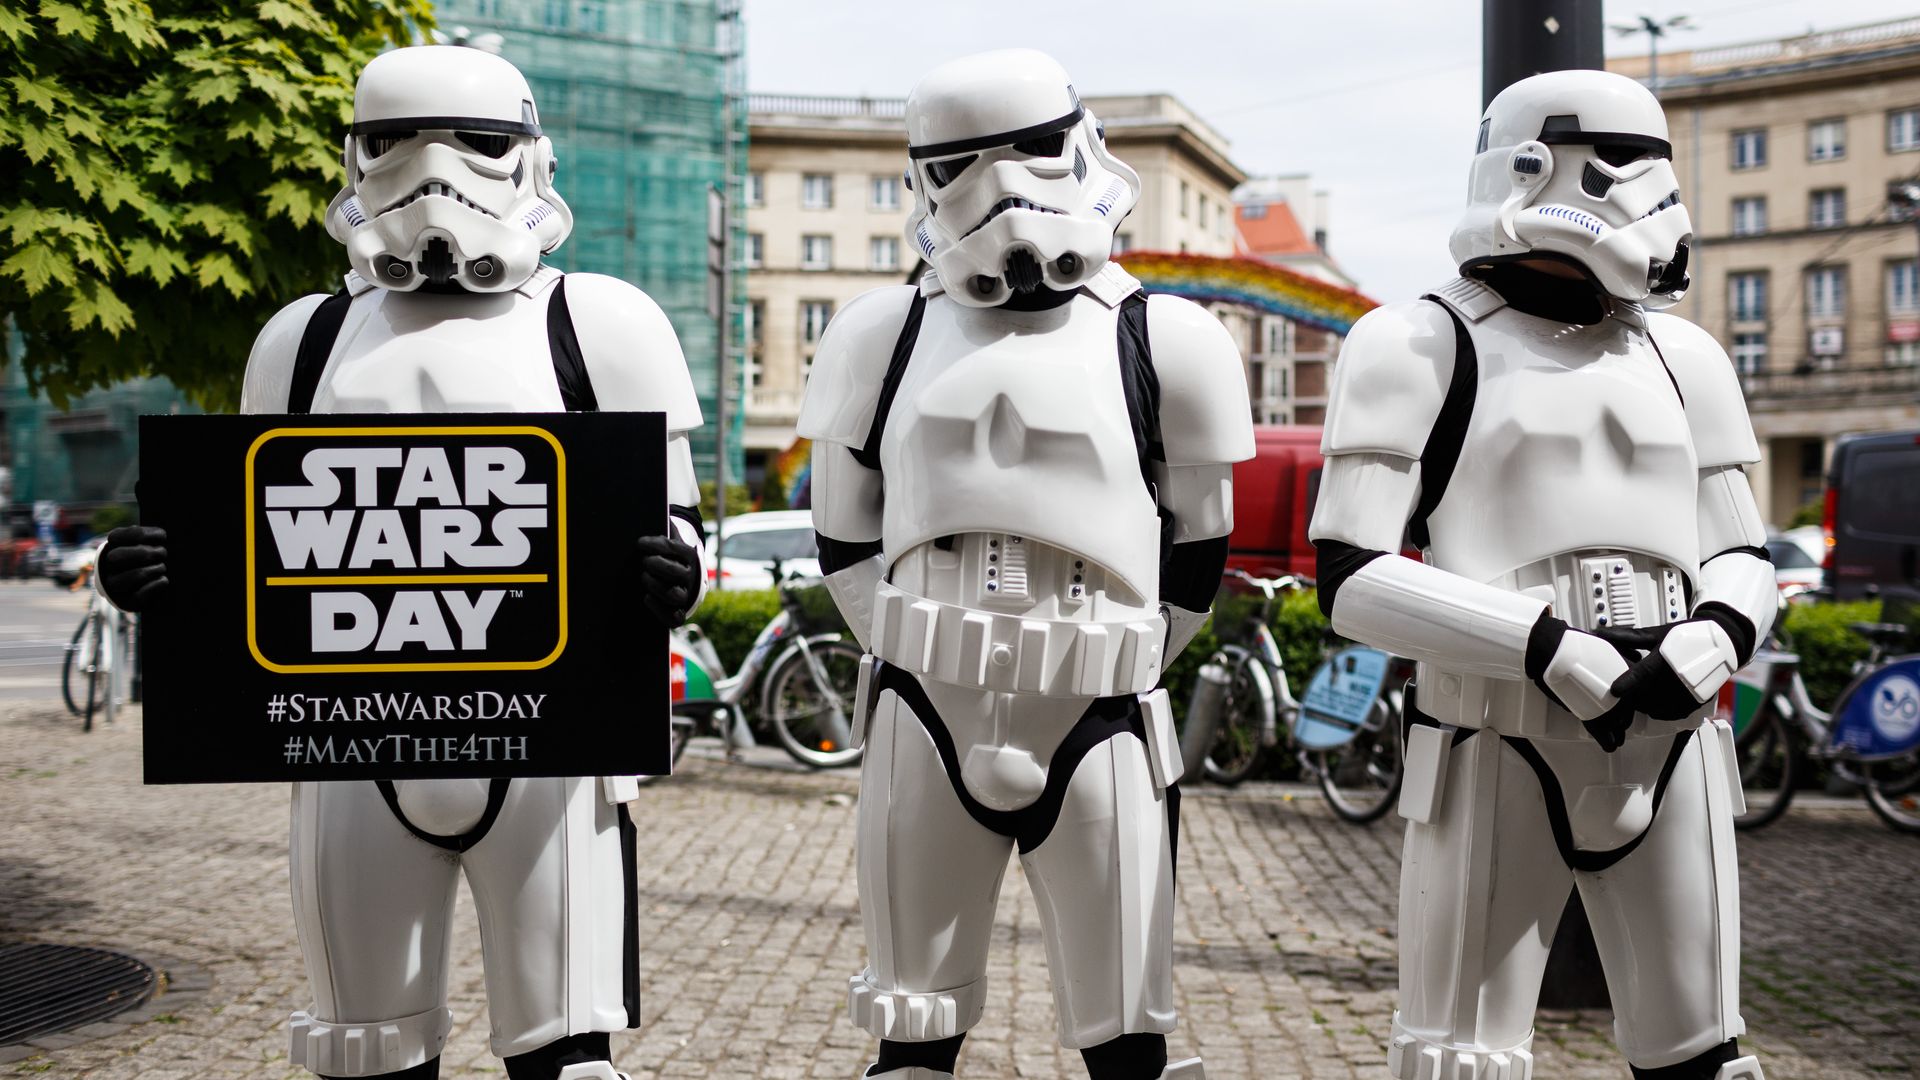 Three storm troopers from the Star Wars movies stand side by side. One is holding a sign that reads Star Wars Day.